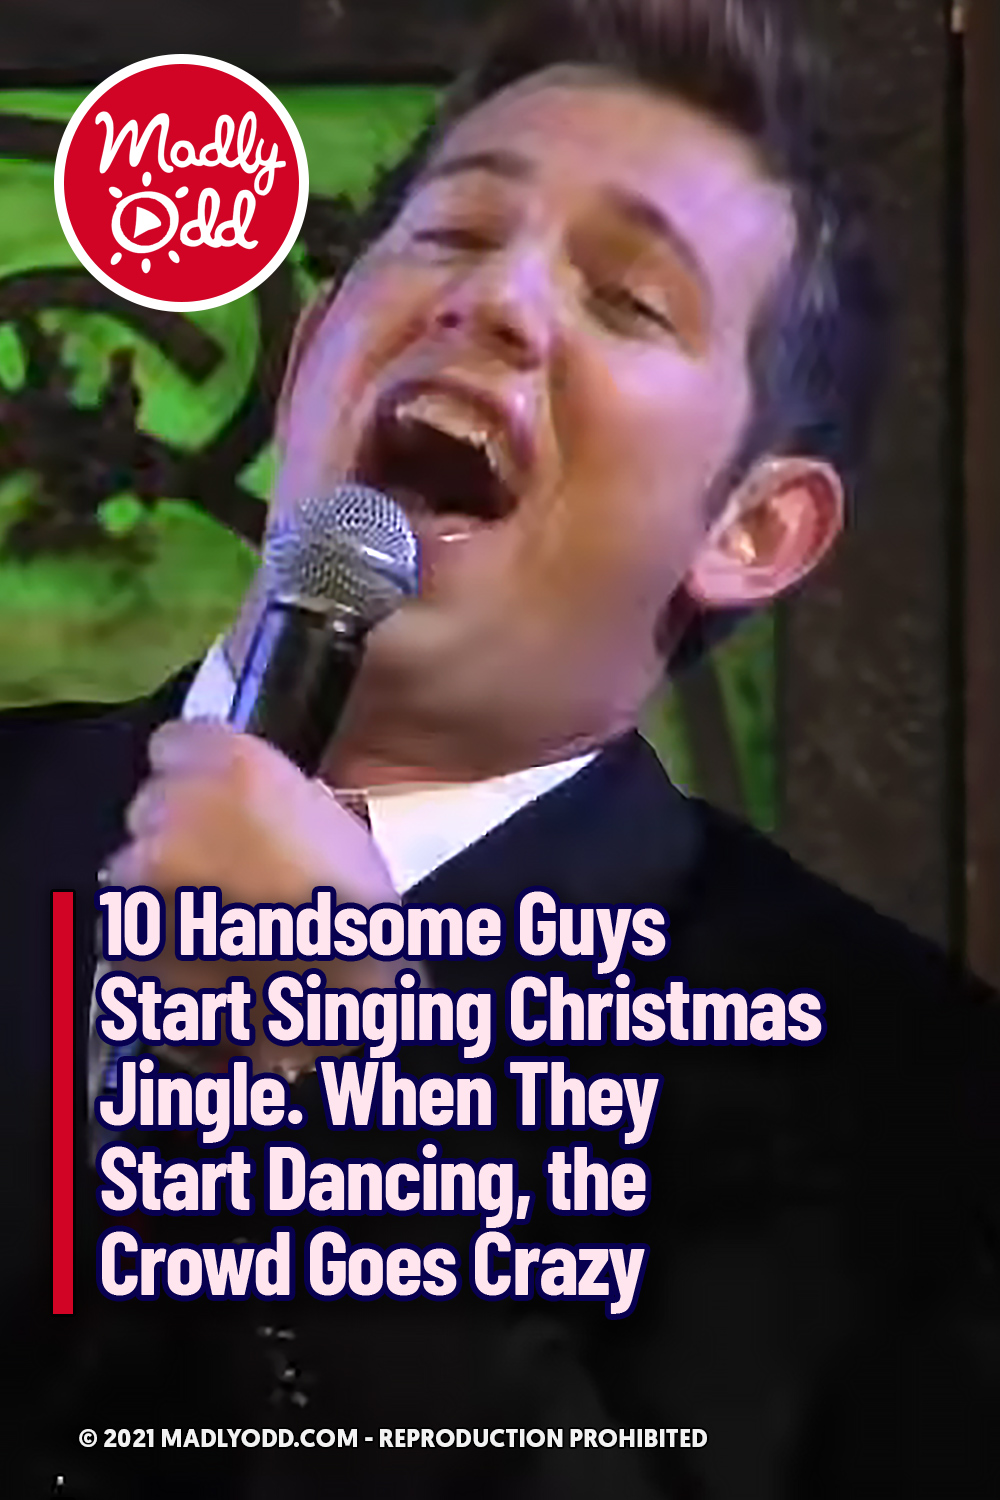 10 Handsome Guys Start Singing Christmas Jingle. When They Start Dancing, the Crowd Goes Crazy